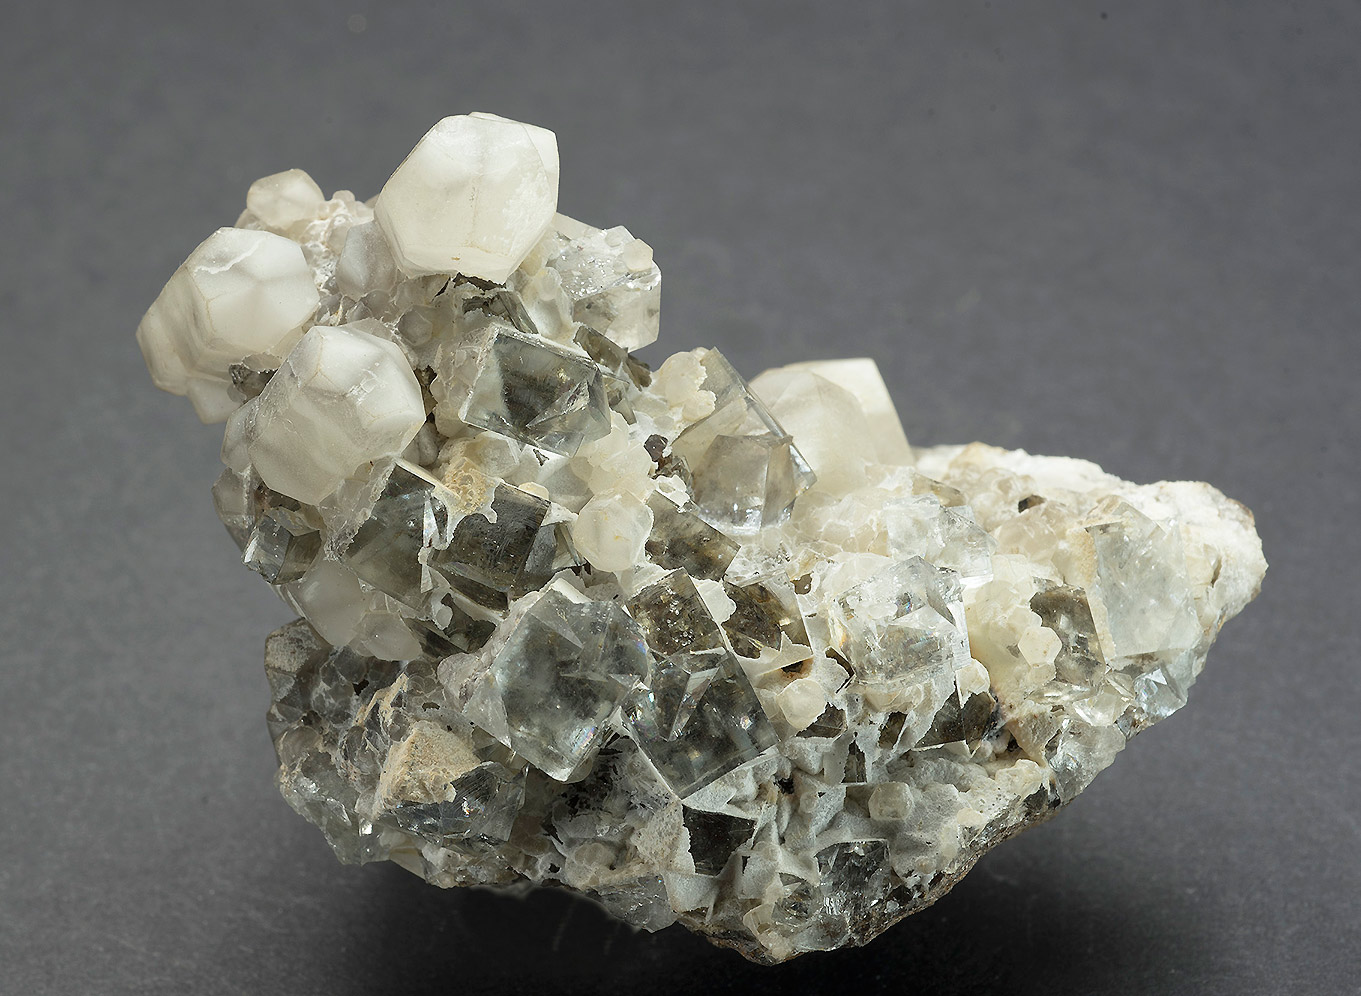 Calcite on fluorite, Heights quarry, Weardale. 75x50x50mm